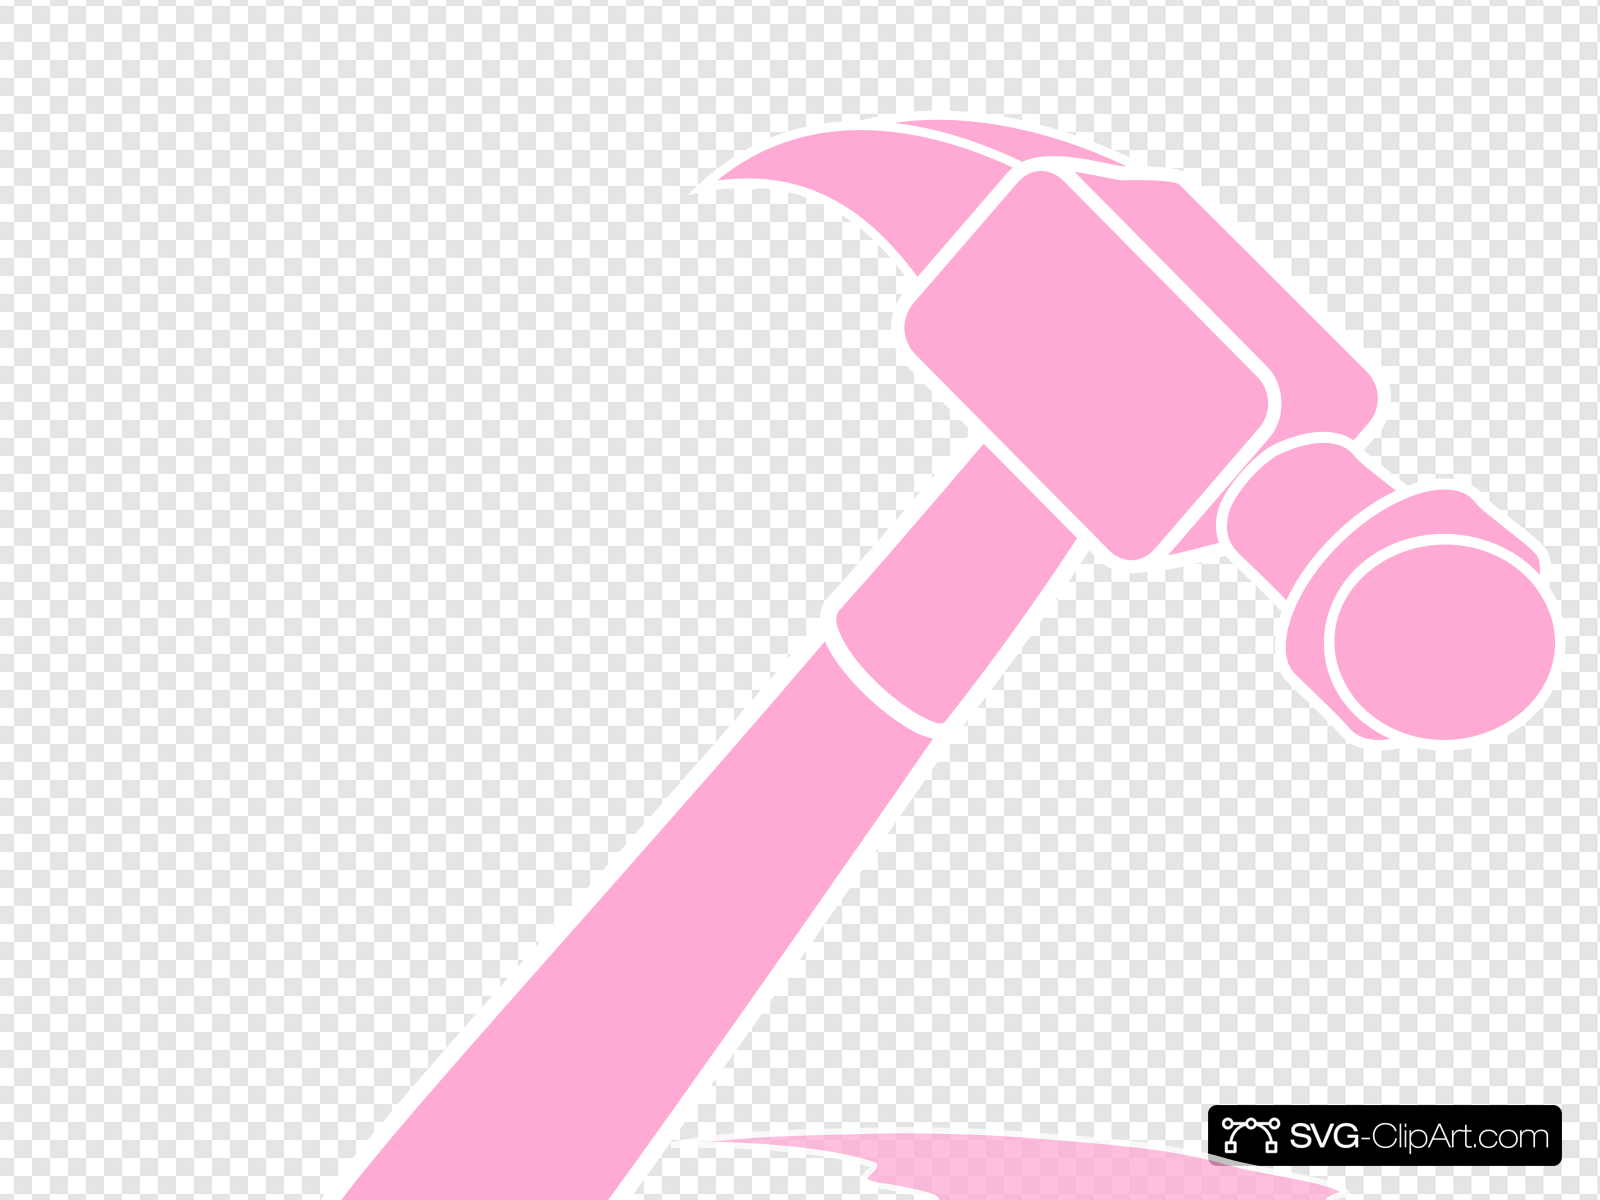 Charming Hammer Clip art, Icon and SVG